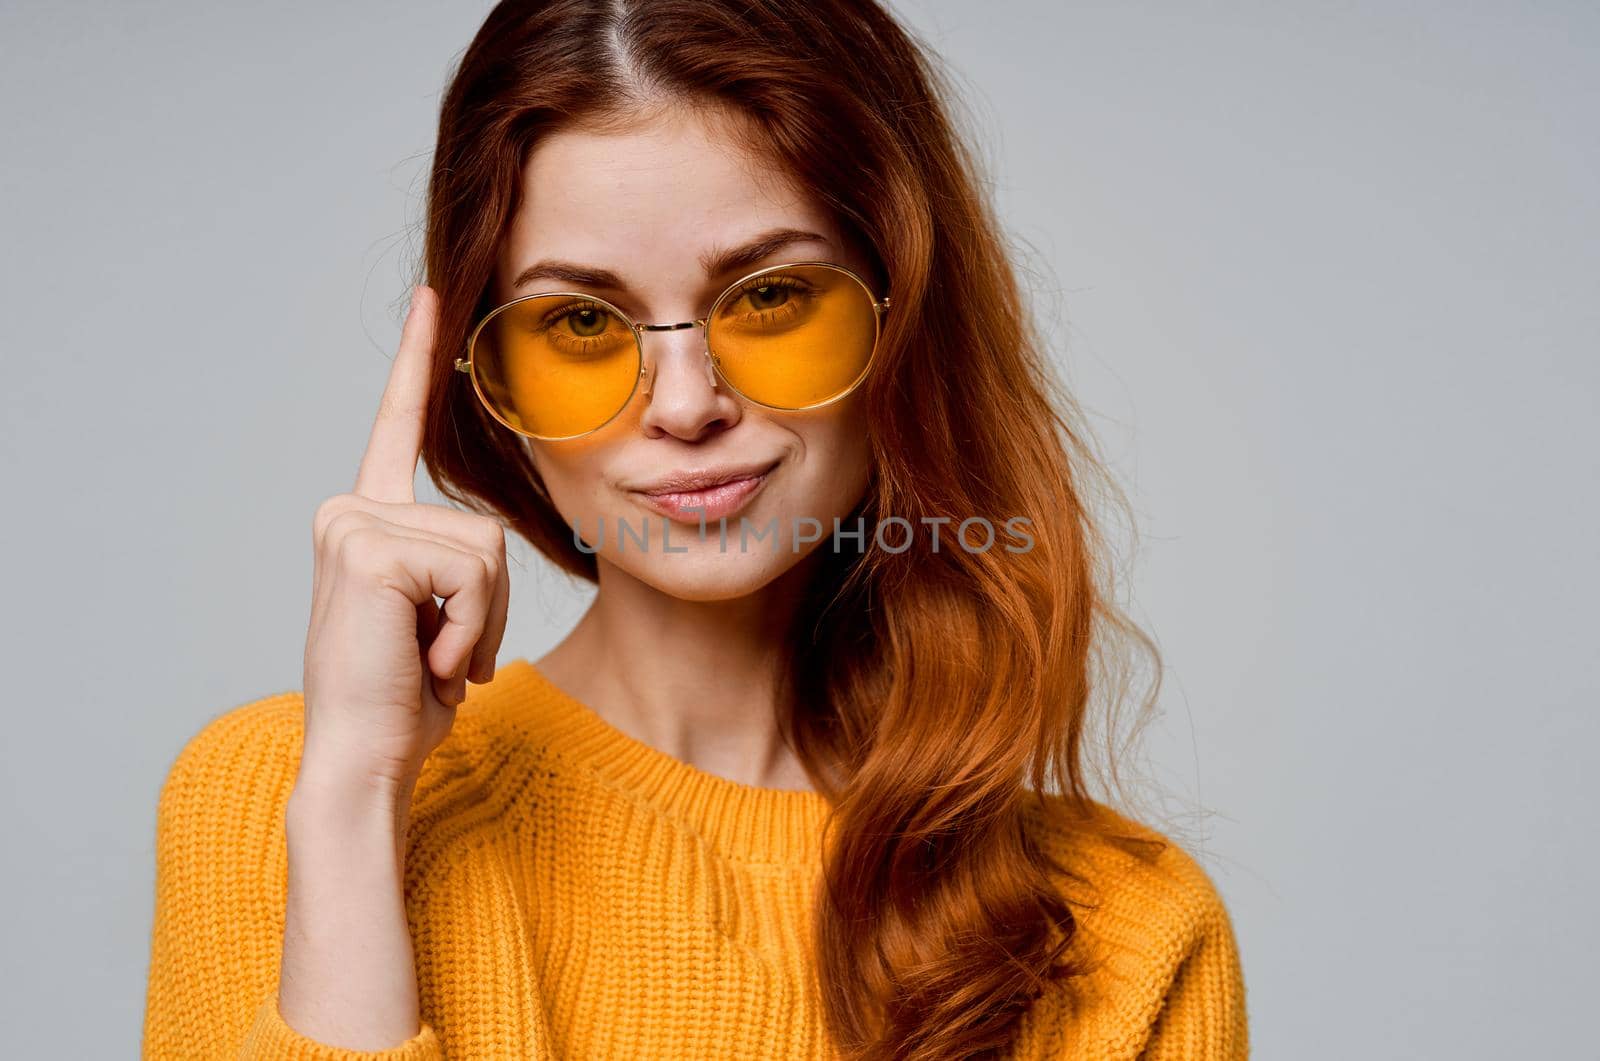 beautiful woman in yellow glasses posing fun lifestyle light background. High quality photo